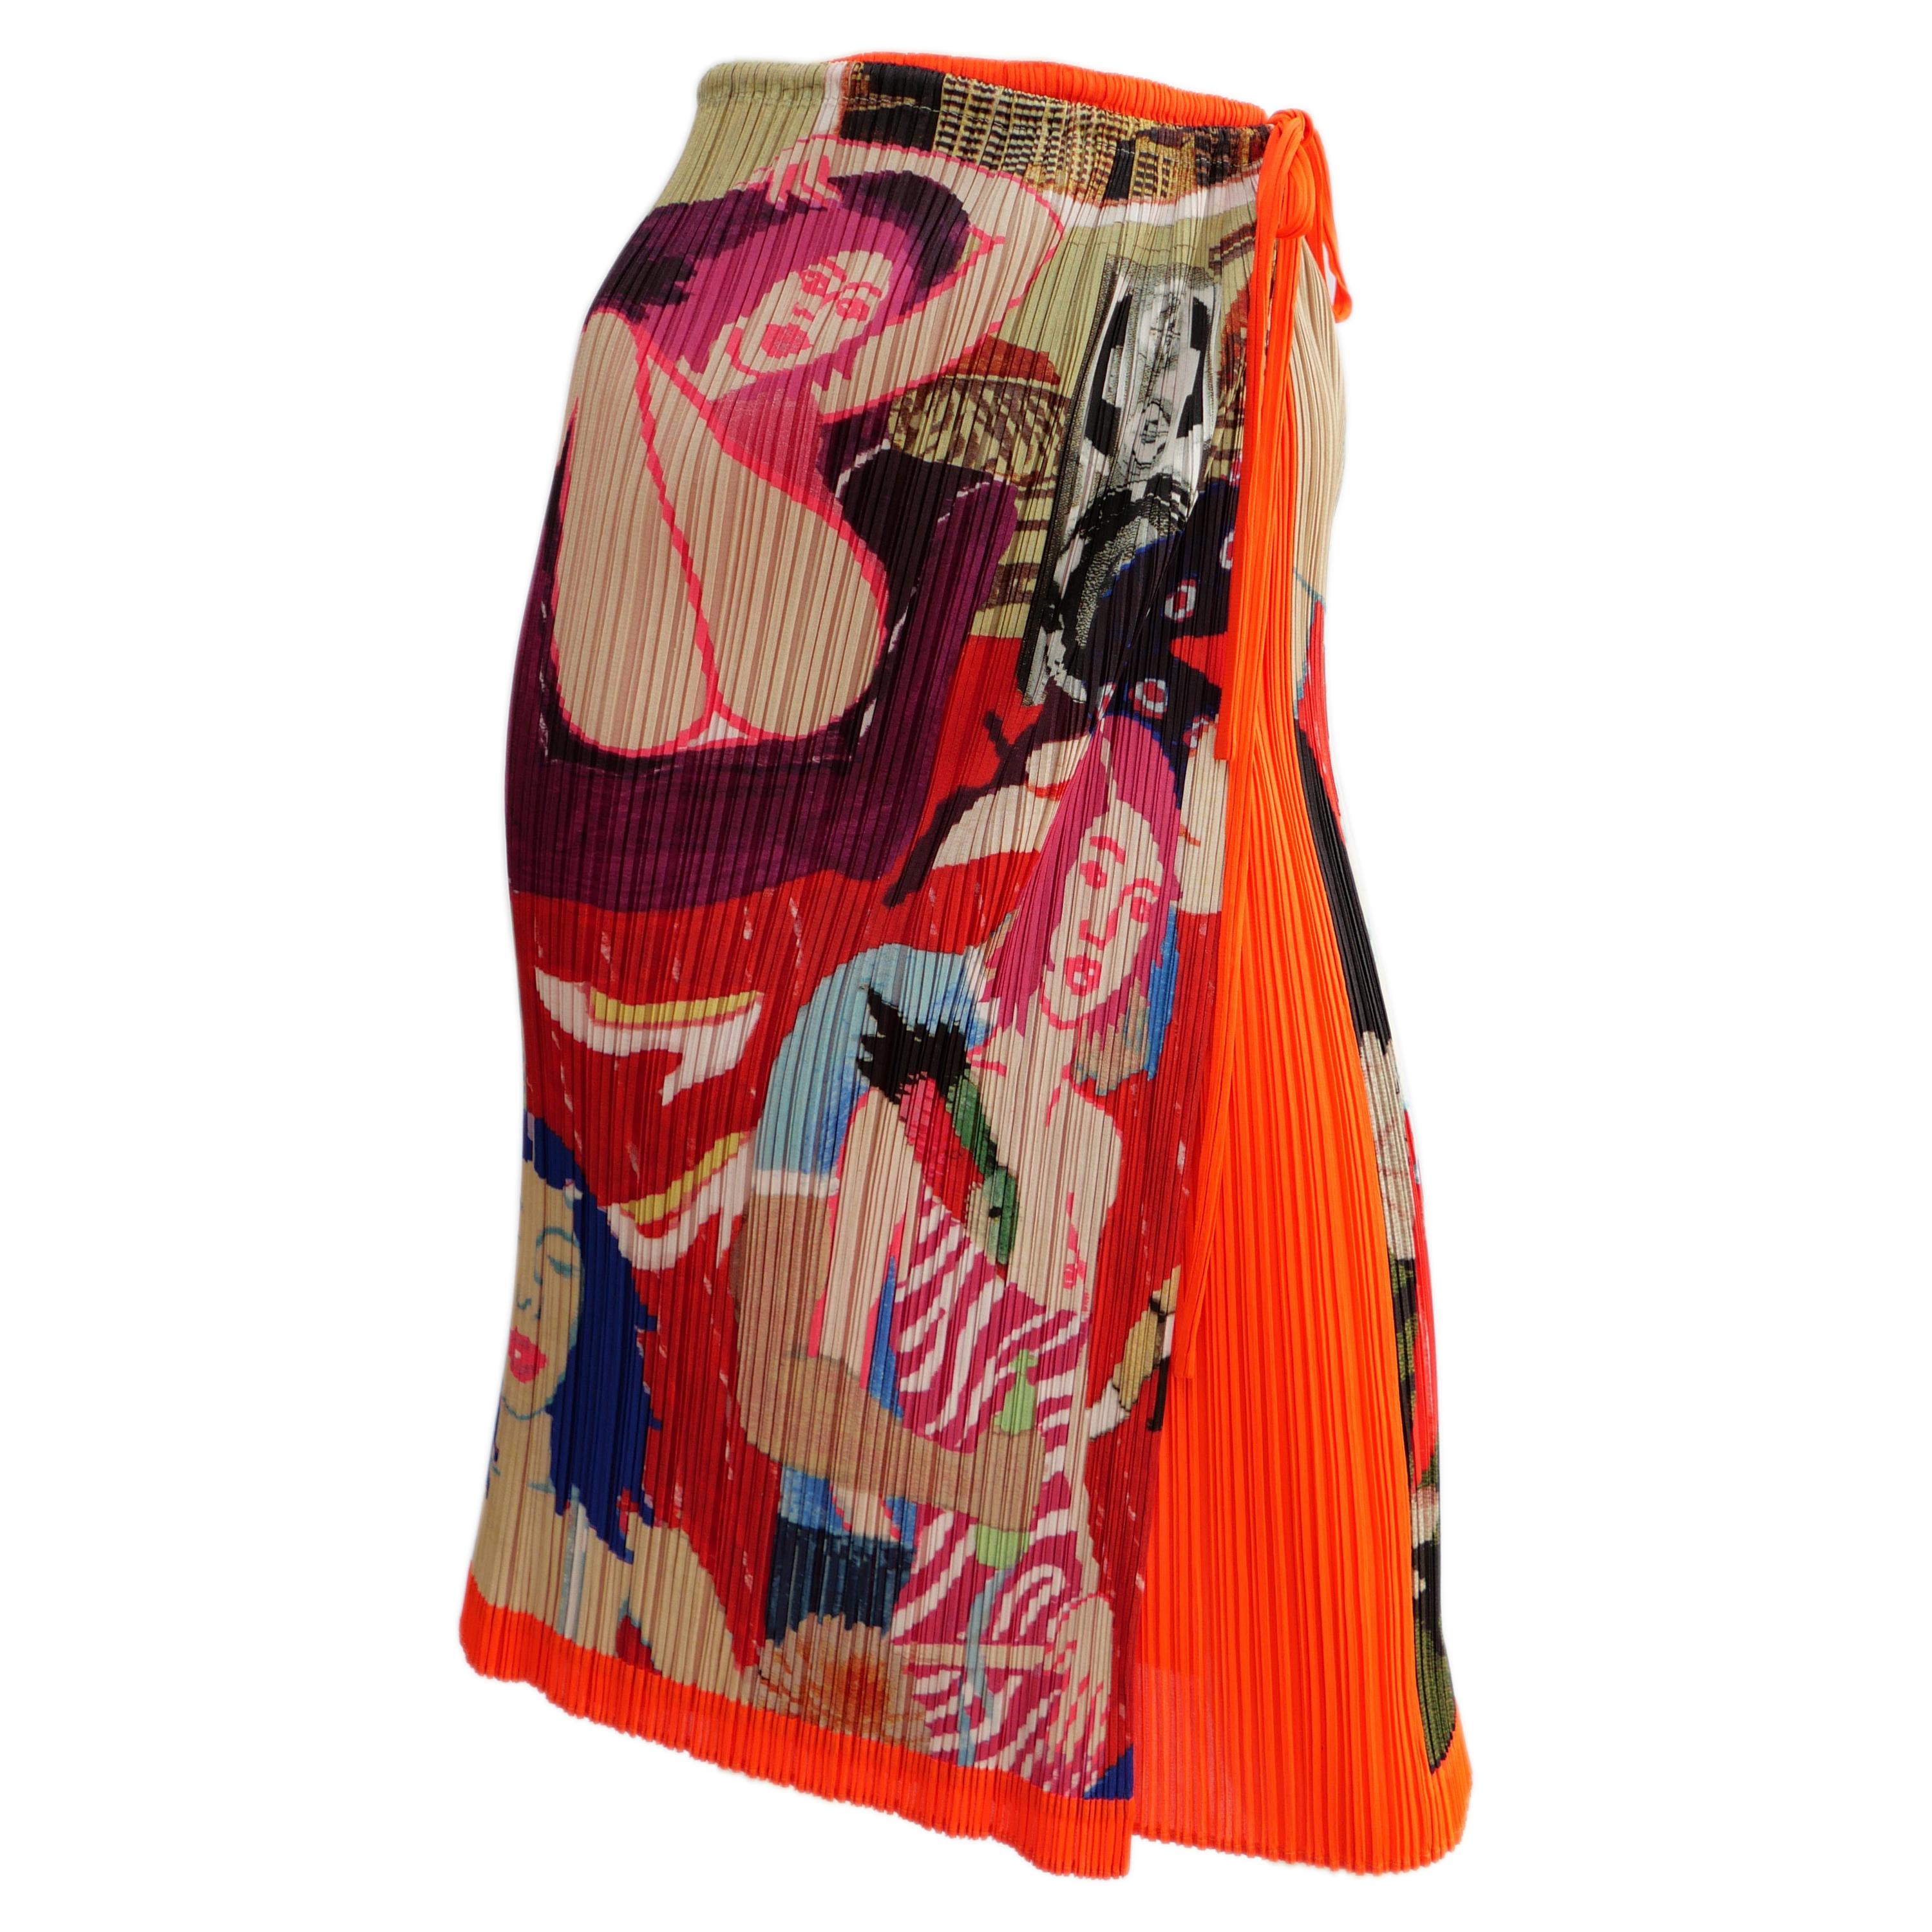  Issey Miyake Skirt With Art Illustration Print For Sale